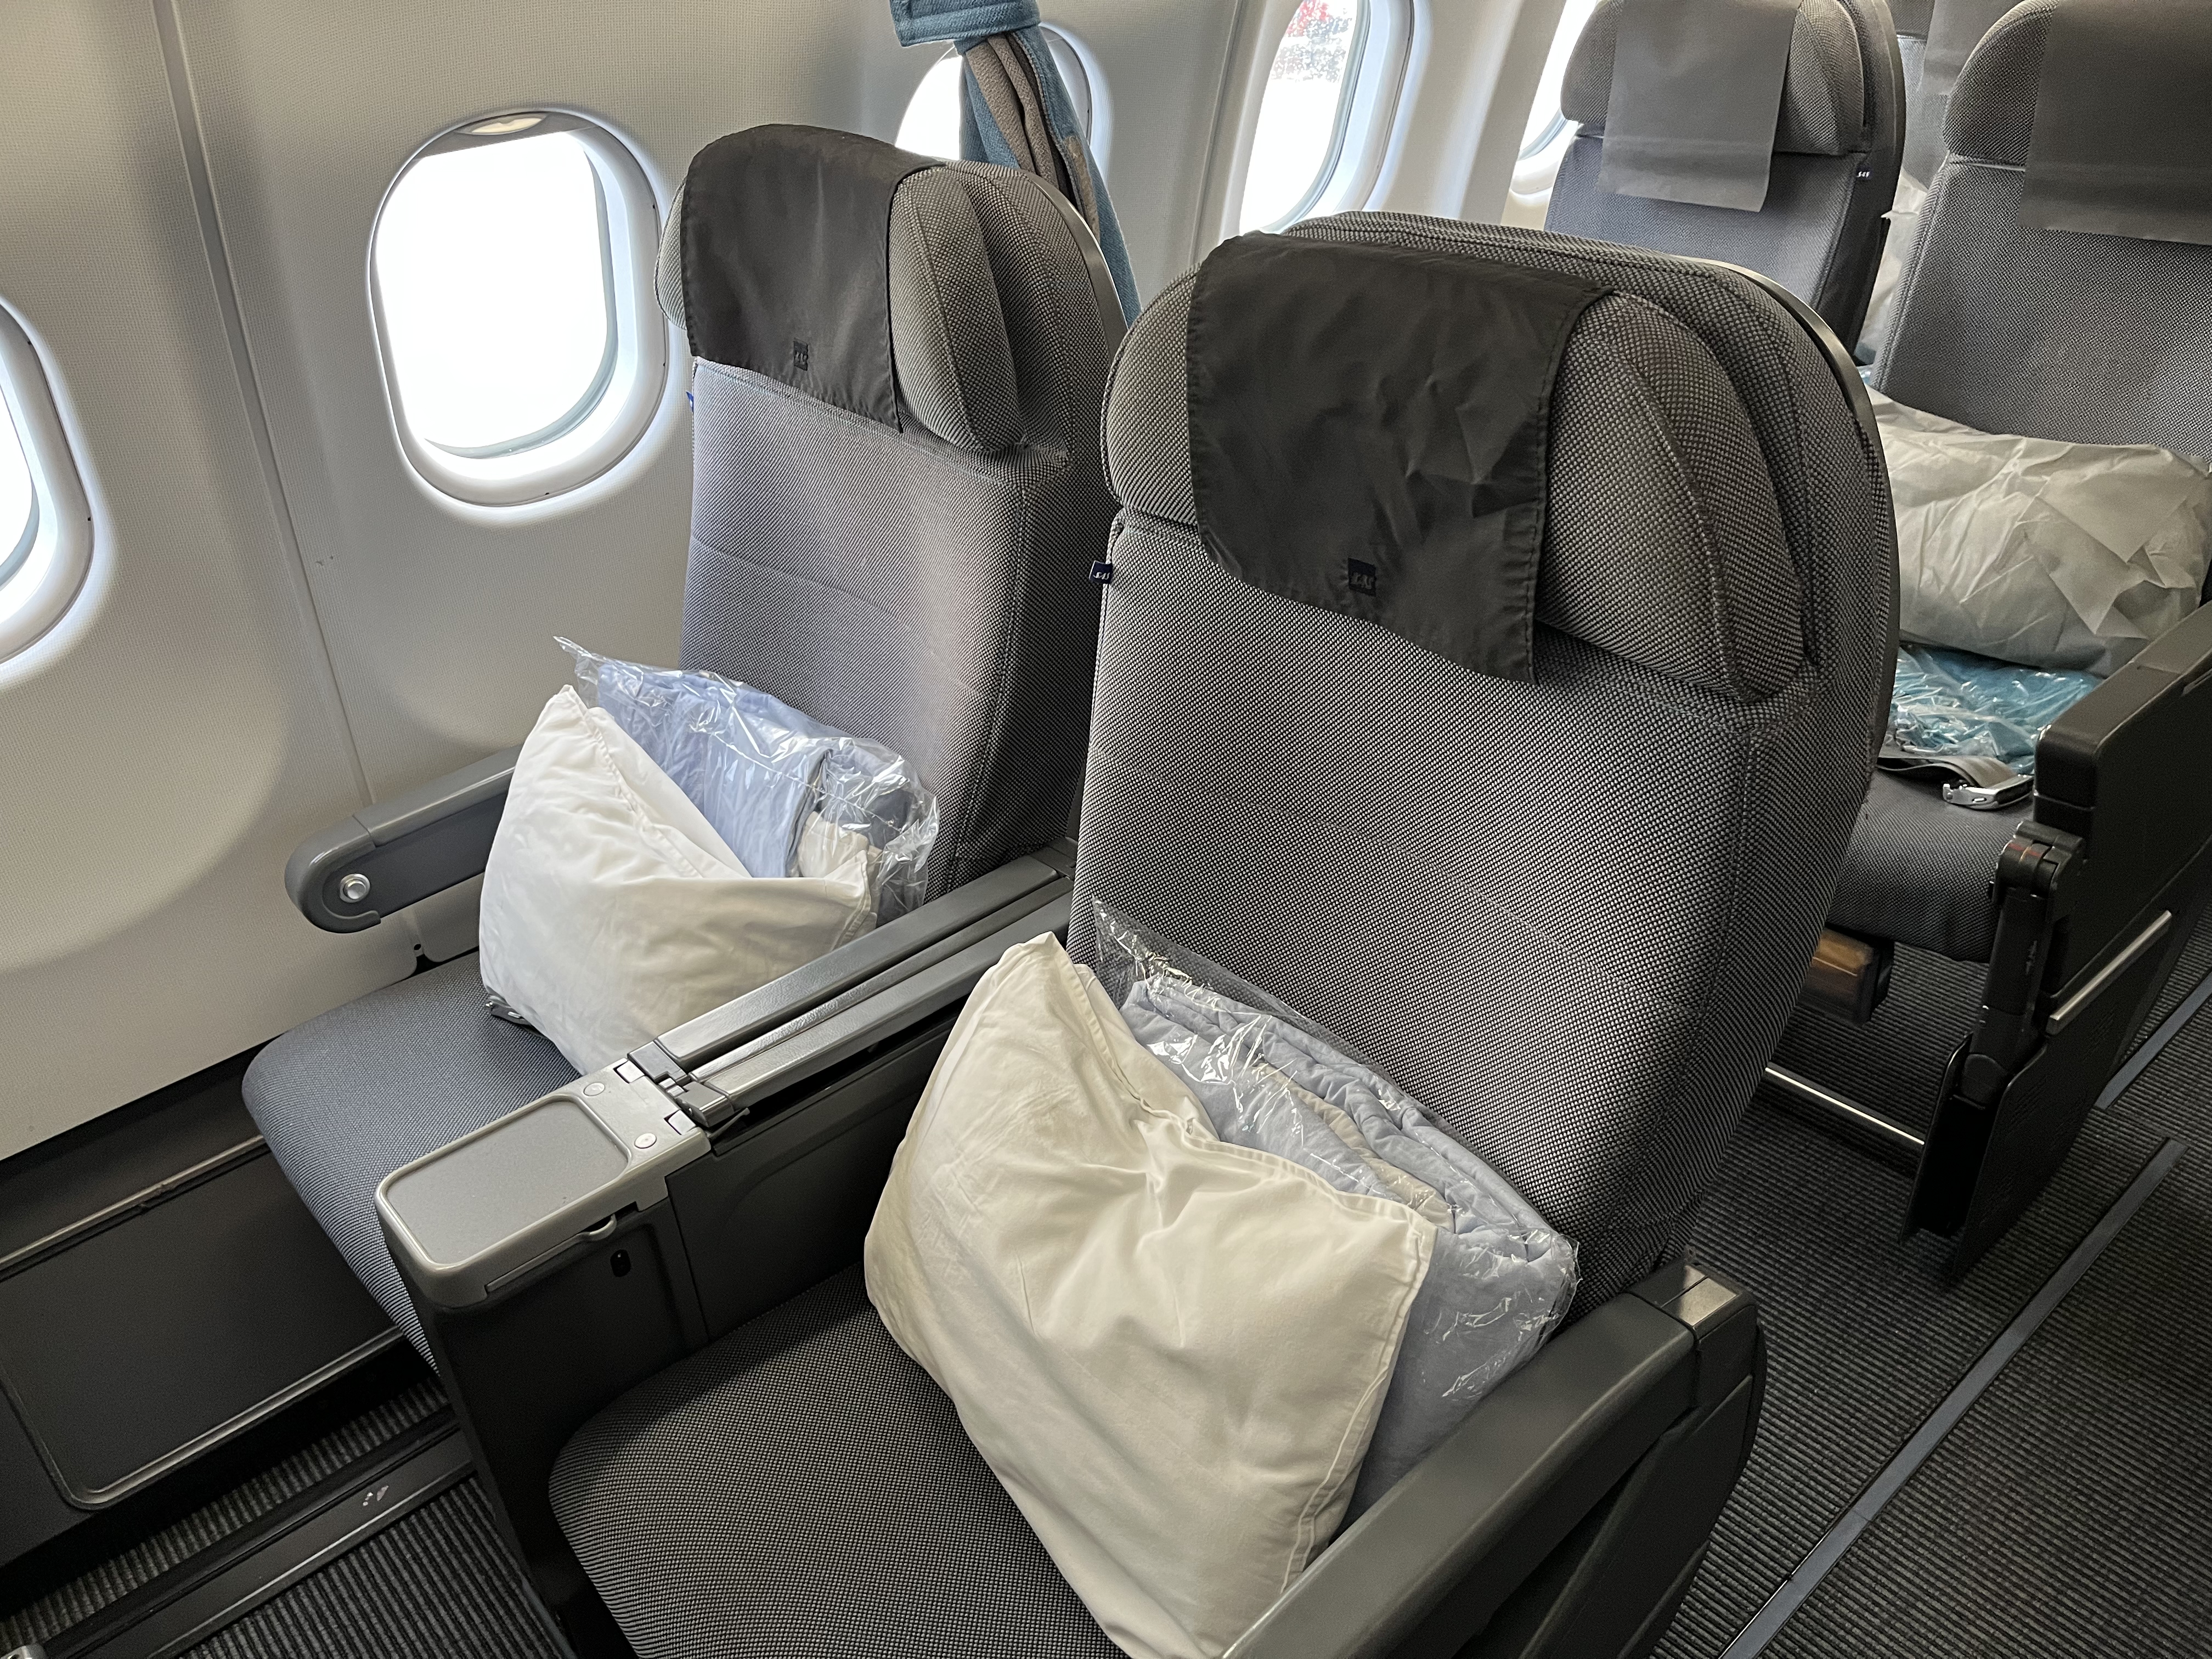 SAS Upgrade Bidding: My Experience Trying Snag Business Class - TravelUpdate